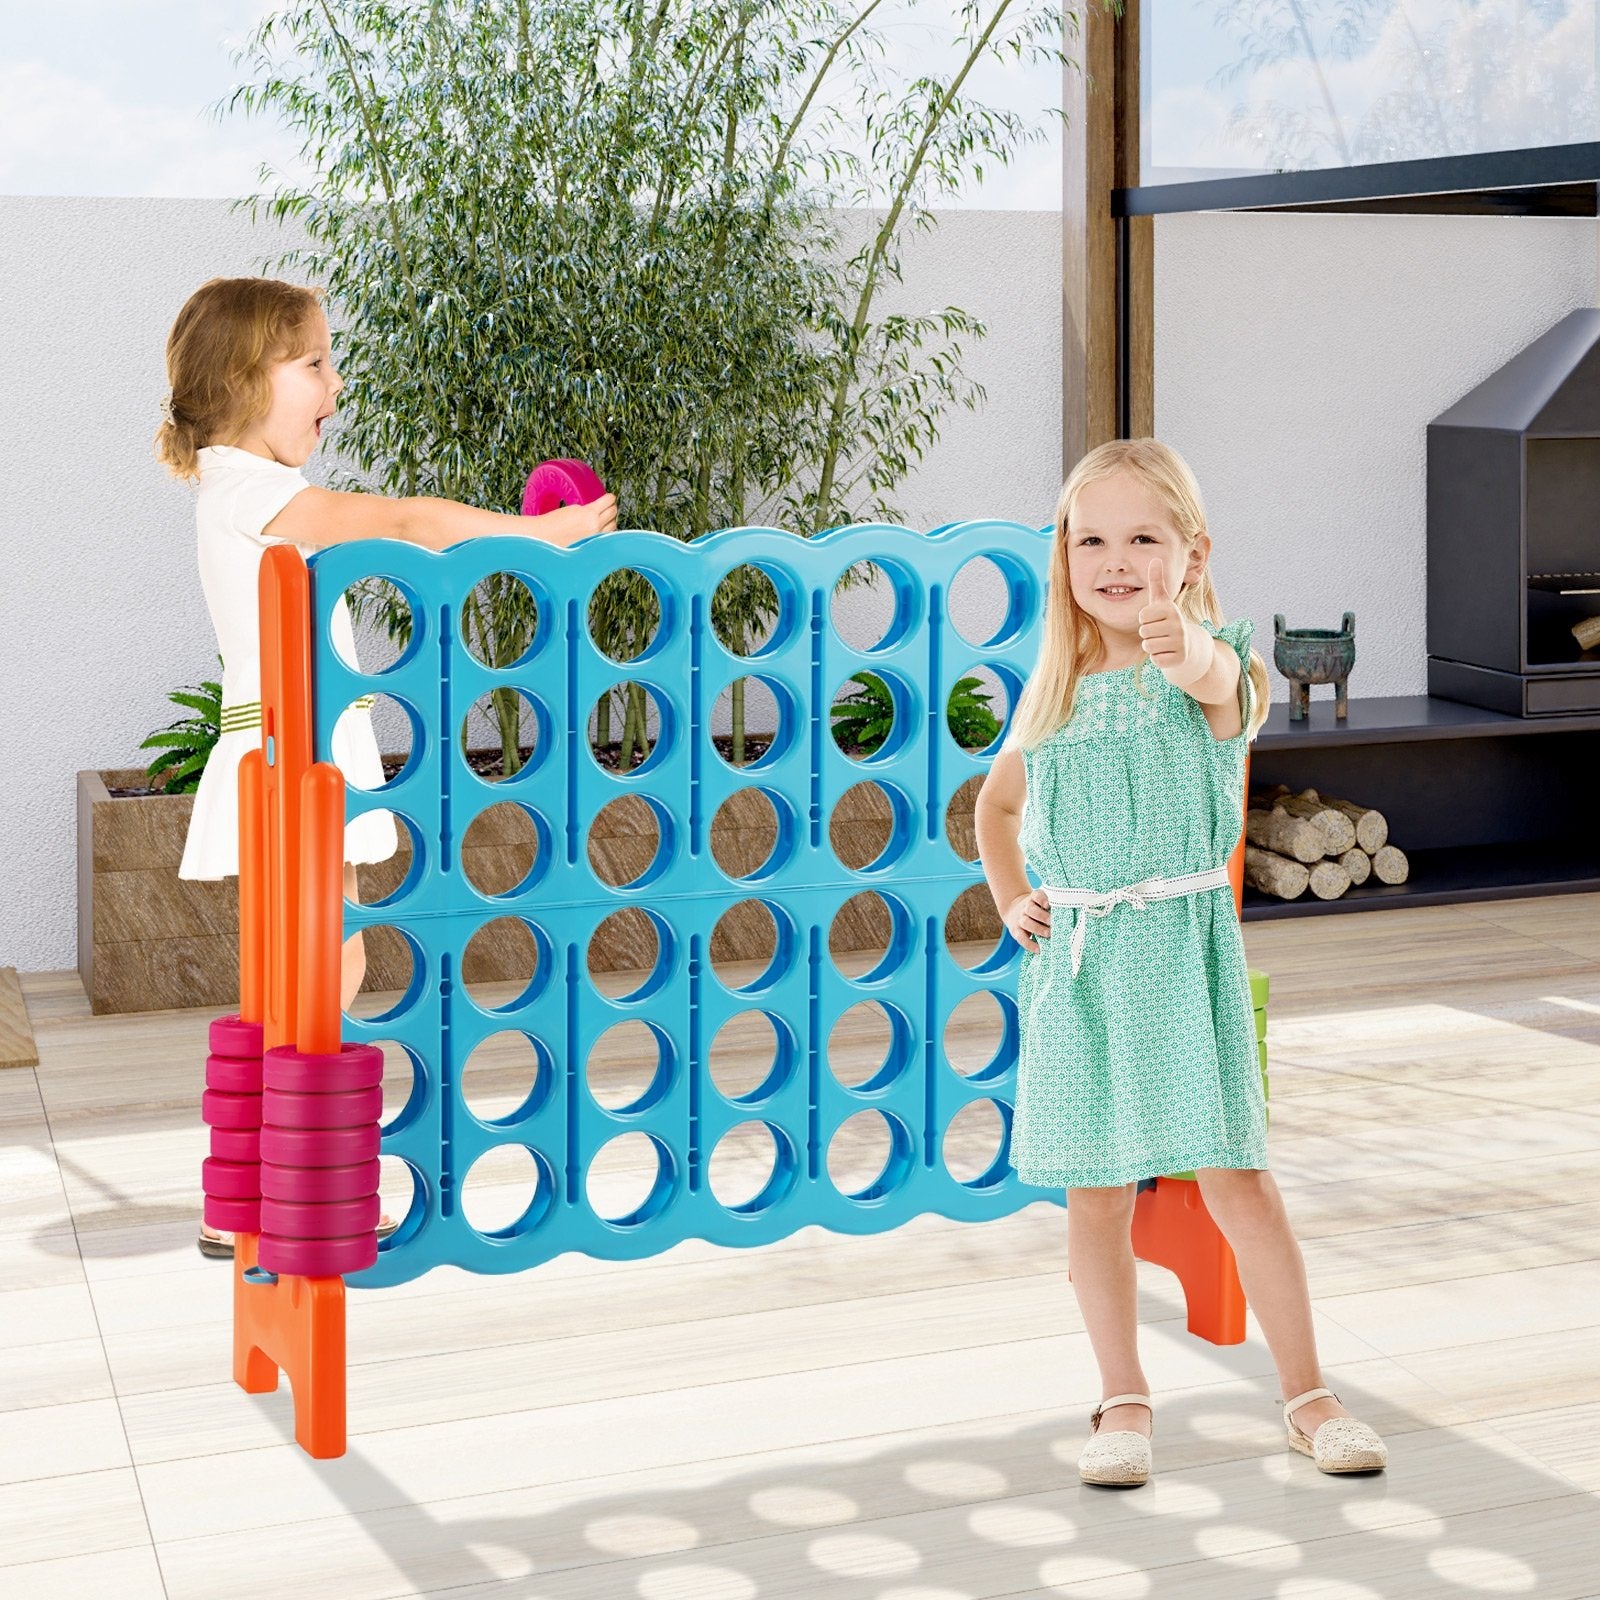 4 in A Row 4-to-Score Giant Jumbo Game Set for Family Party Holiday, Light Blue at Gallery Canada